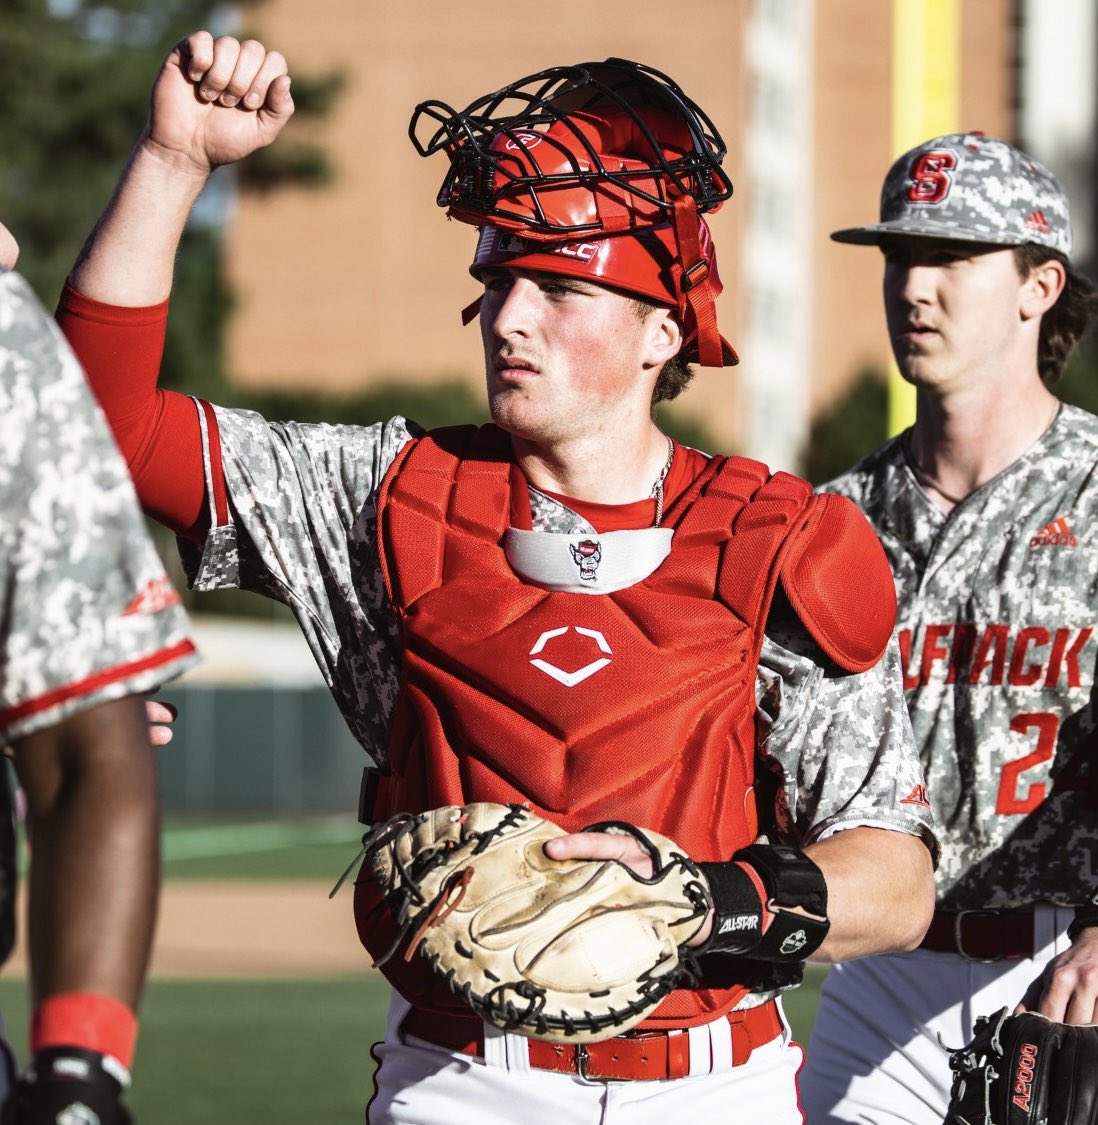 BREAKING: Freshman All-American catcher Cannon Peebles has announced he will be transferring to Tennessee. Peebles hit .352 with an OBP of .456 last year for NC State.